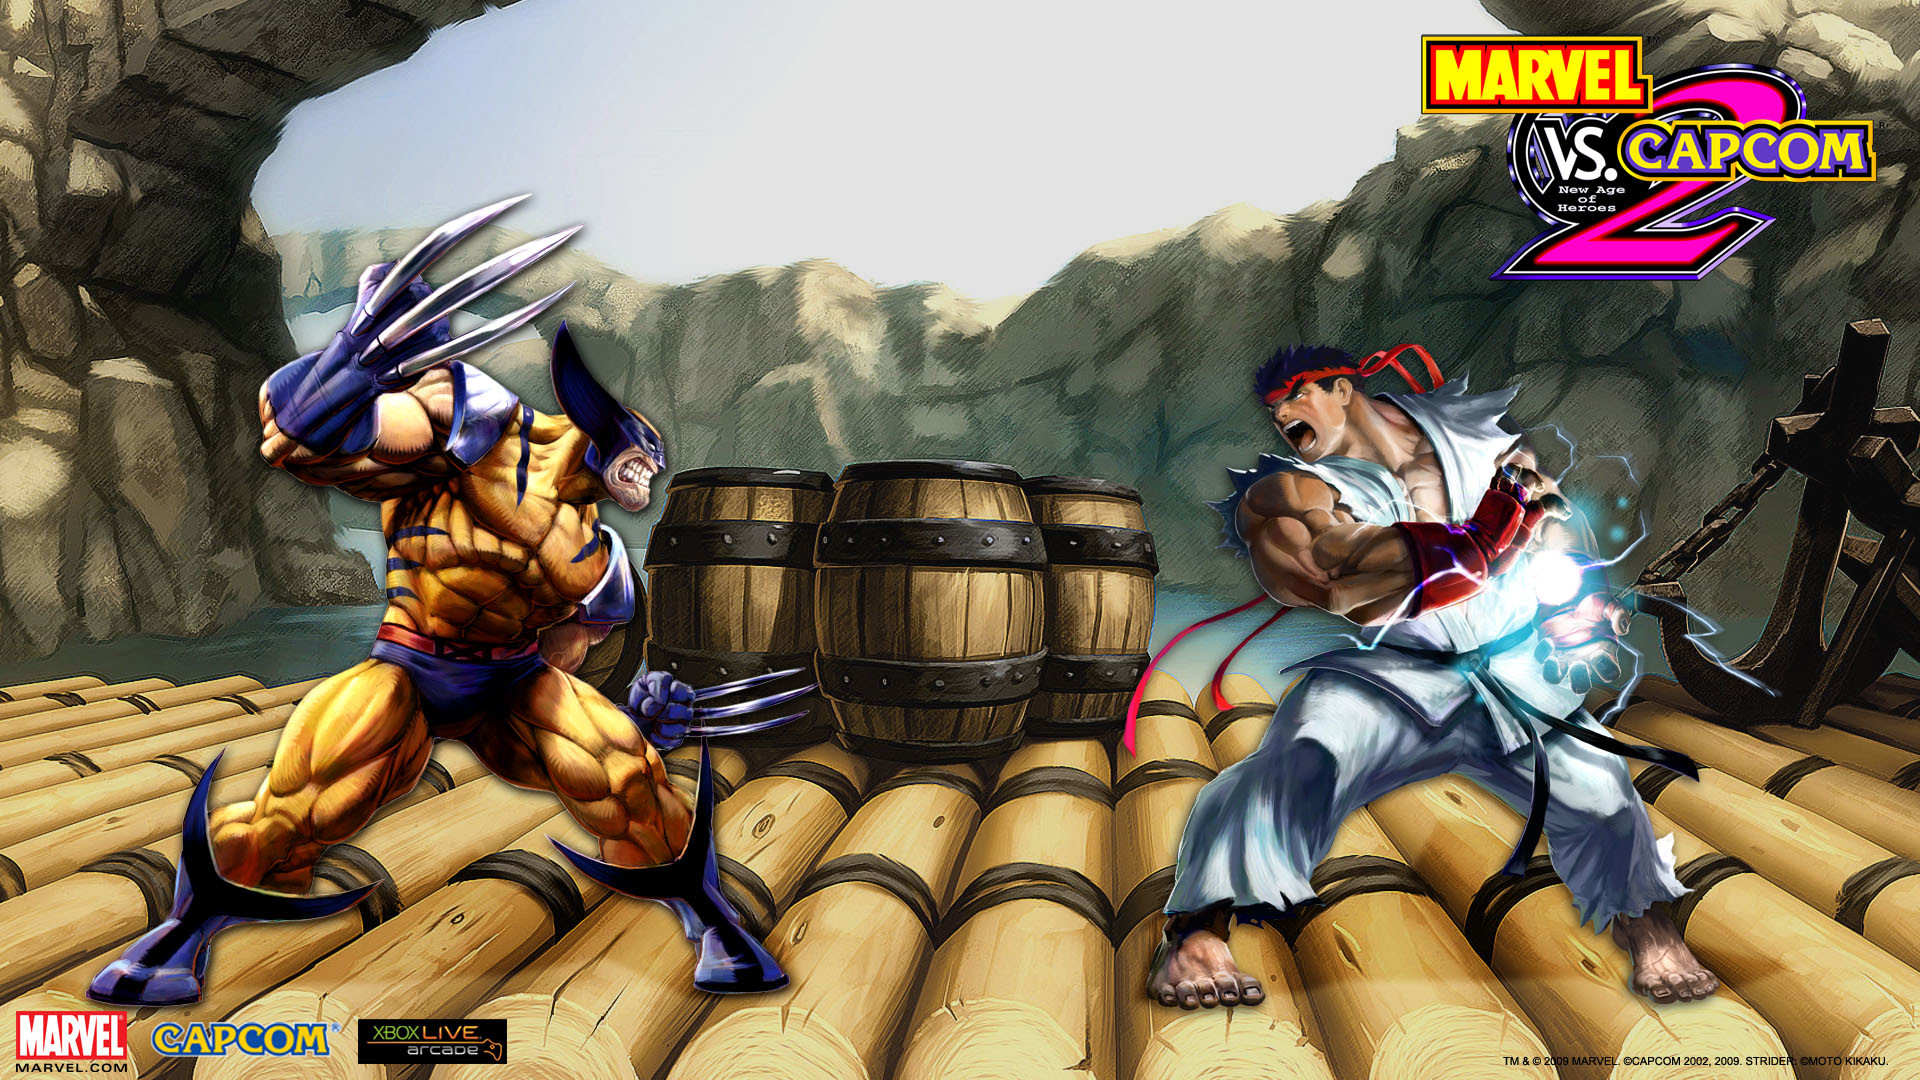 1920x1080 Series Crossovers images Marvel Vs. Capcom HD wallpaper and background  photos